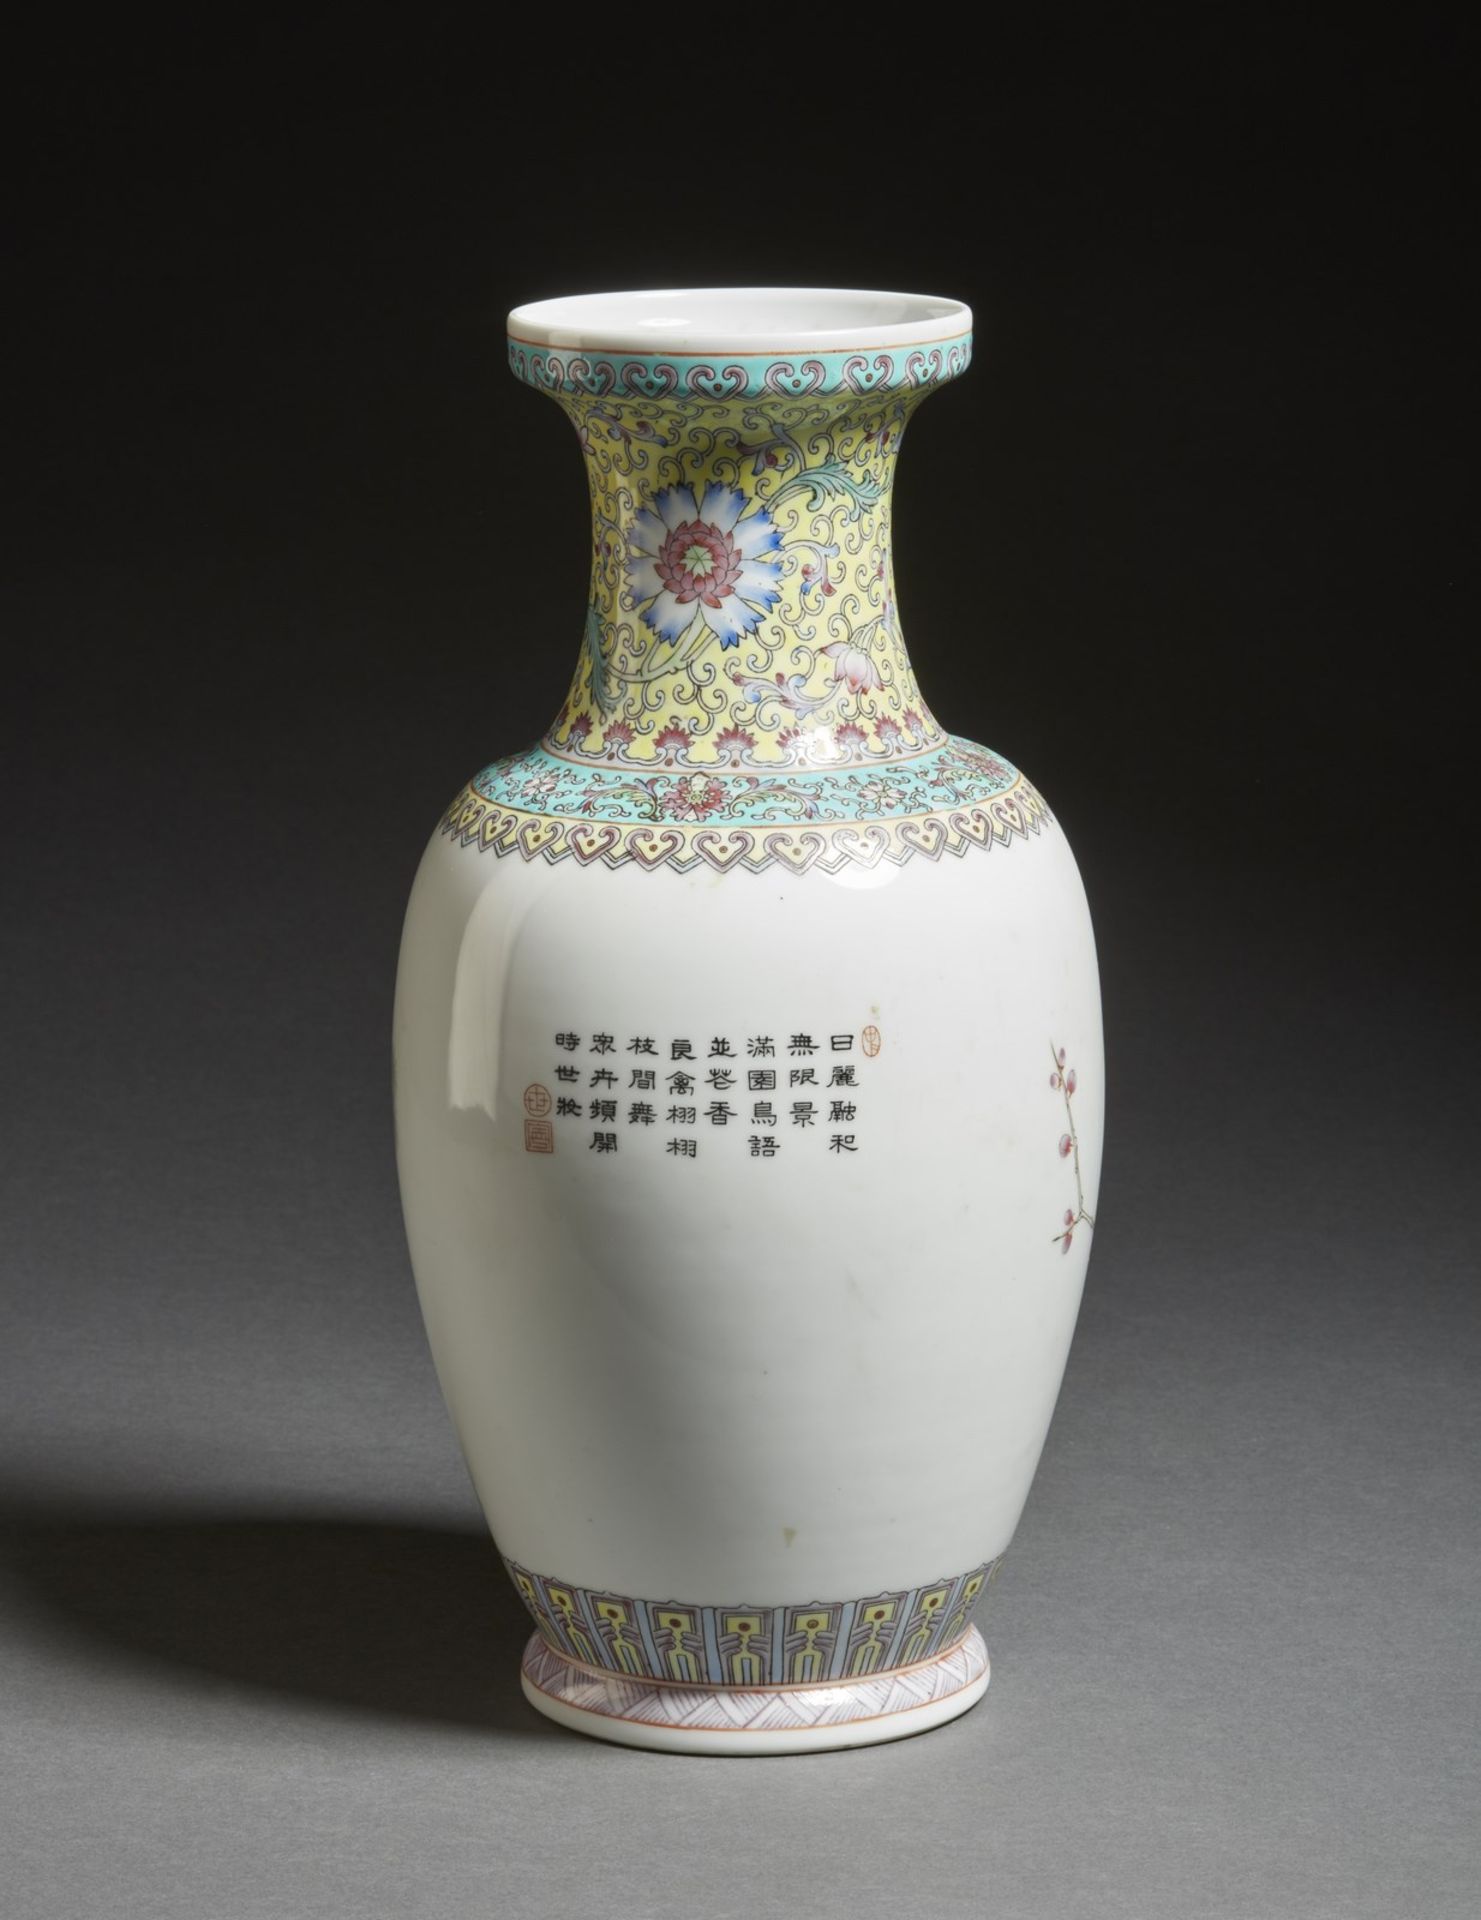 Arte Cinese A porcelain vase decorated with peacock and inscription China, second half 20th century - Image 2 of 3